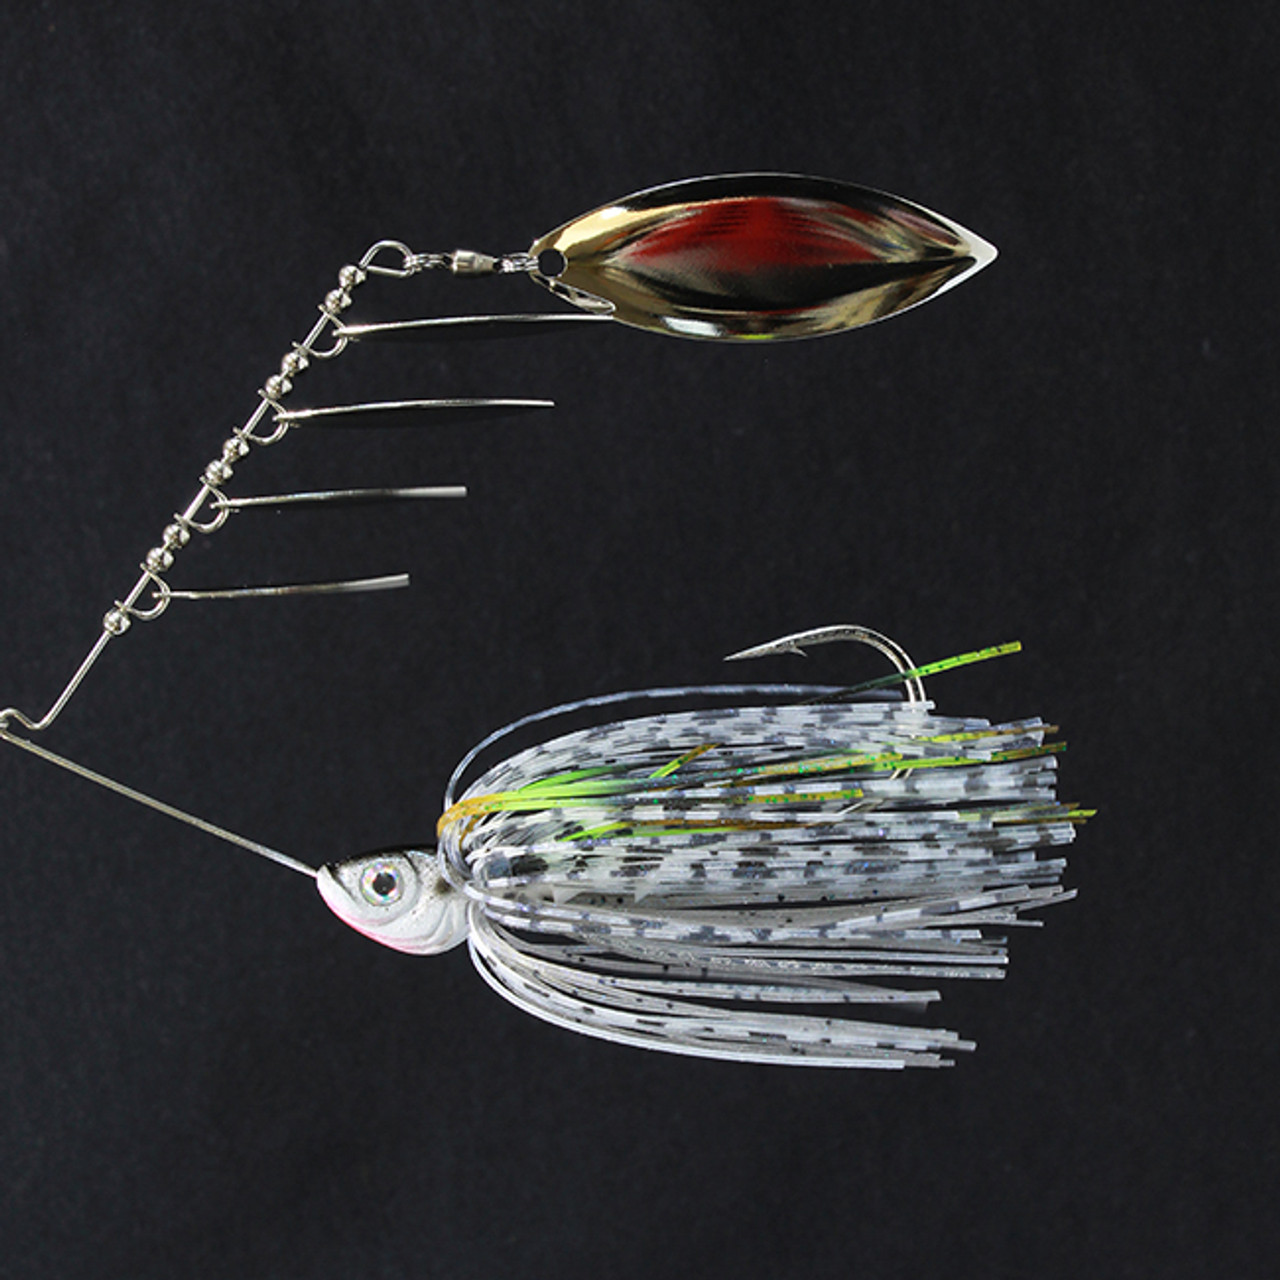 ScatterShad™ FH-5 Spinnerbait For Bass Fishing.